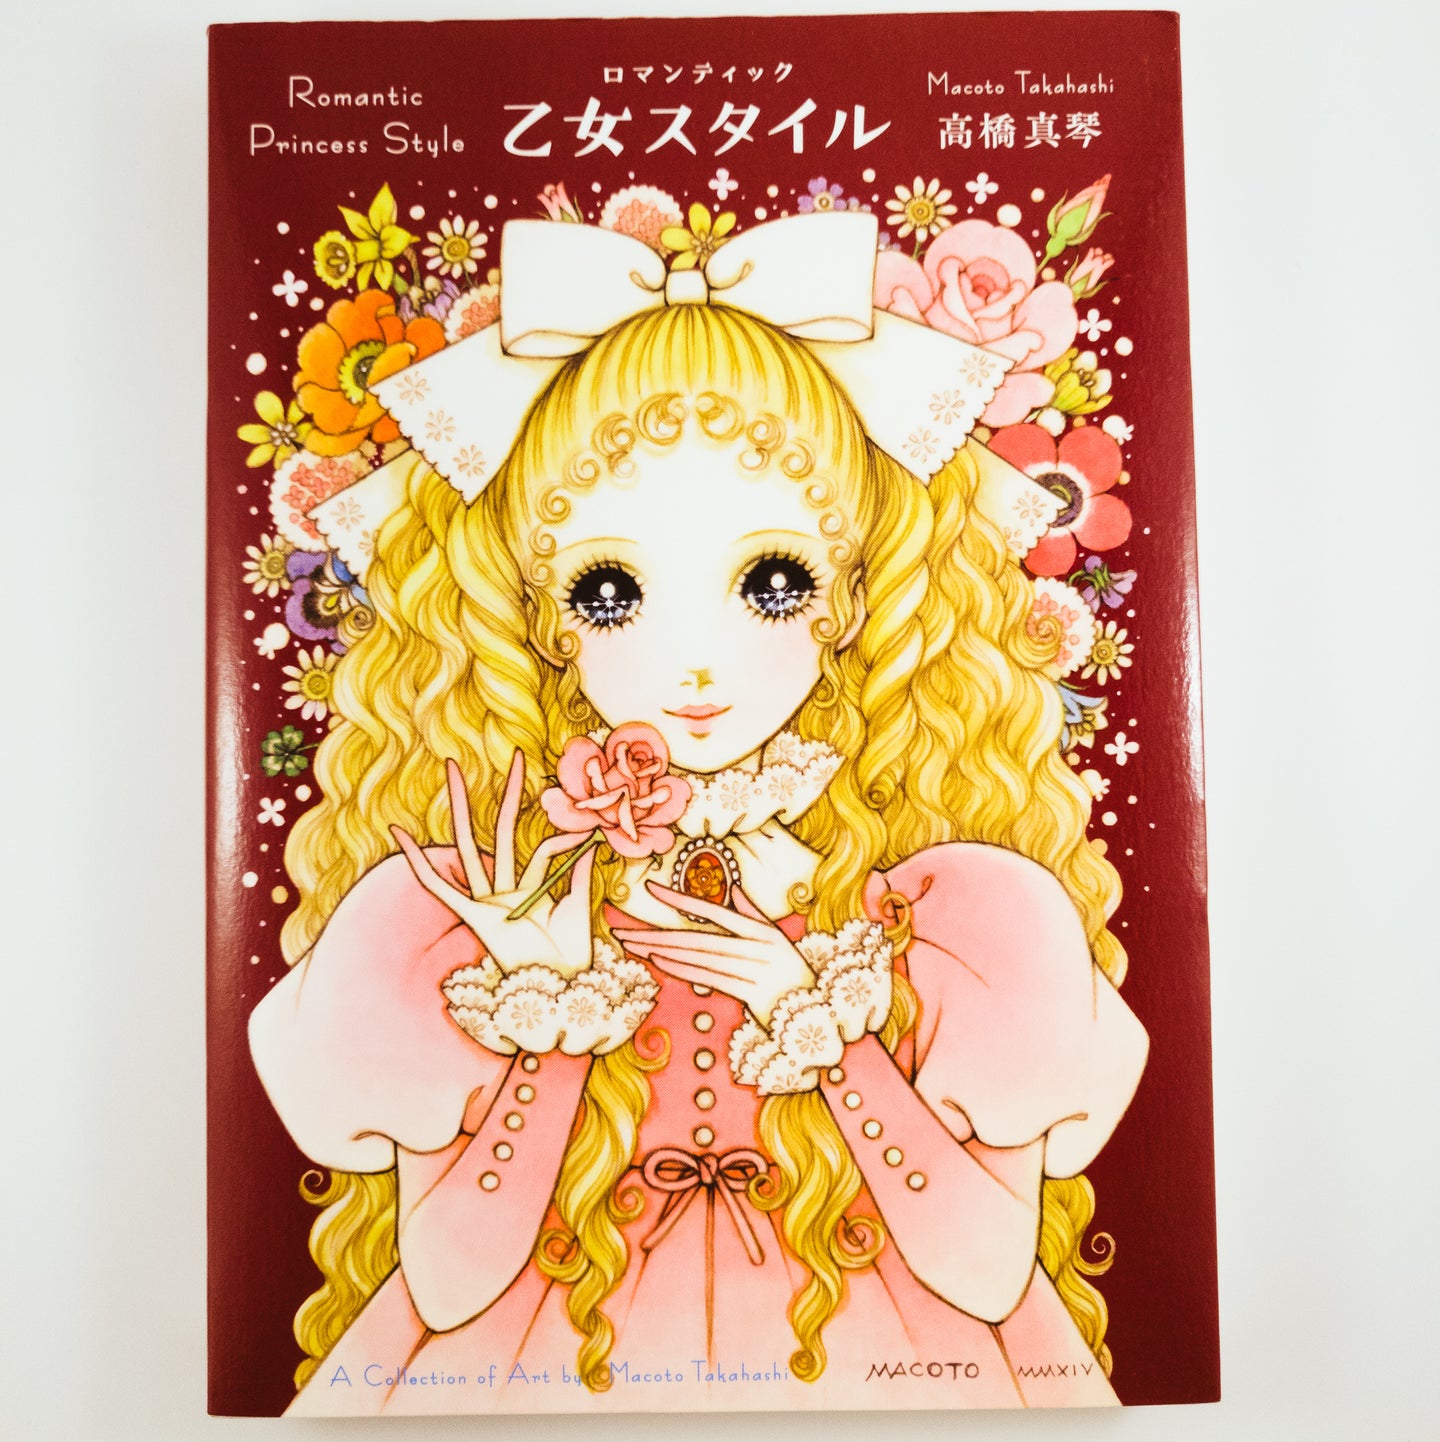 Romantic Princess Style Art Collection by Macoto Takahashi